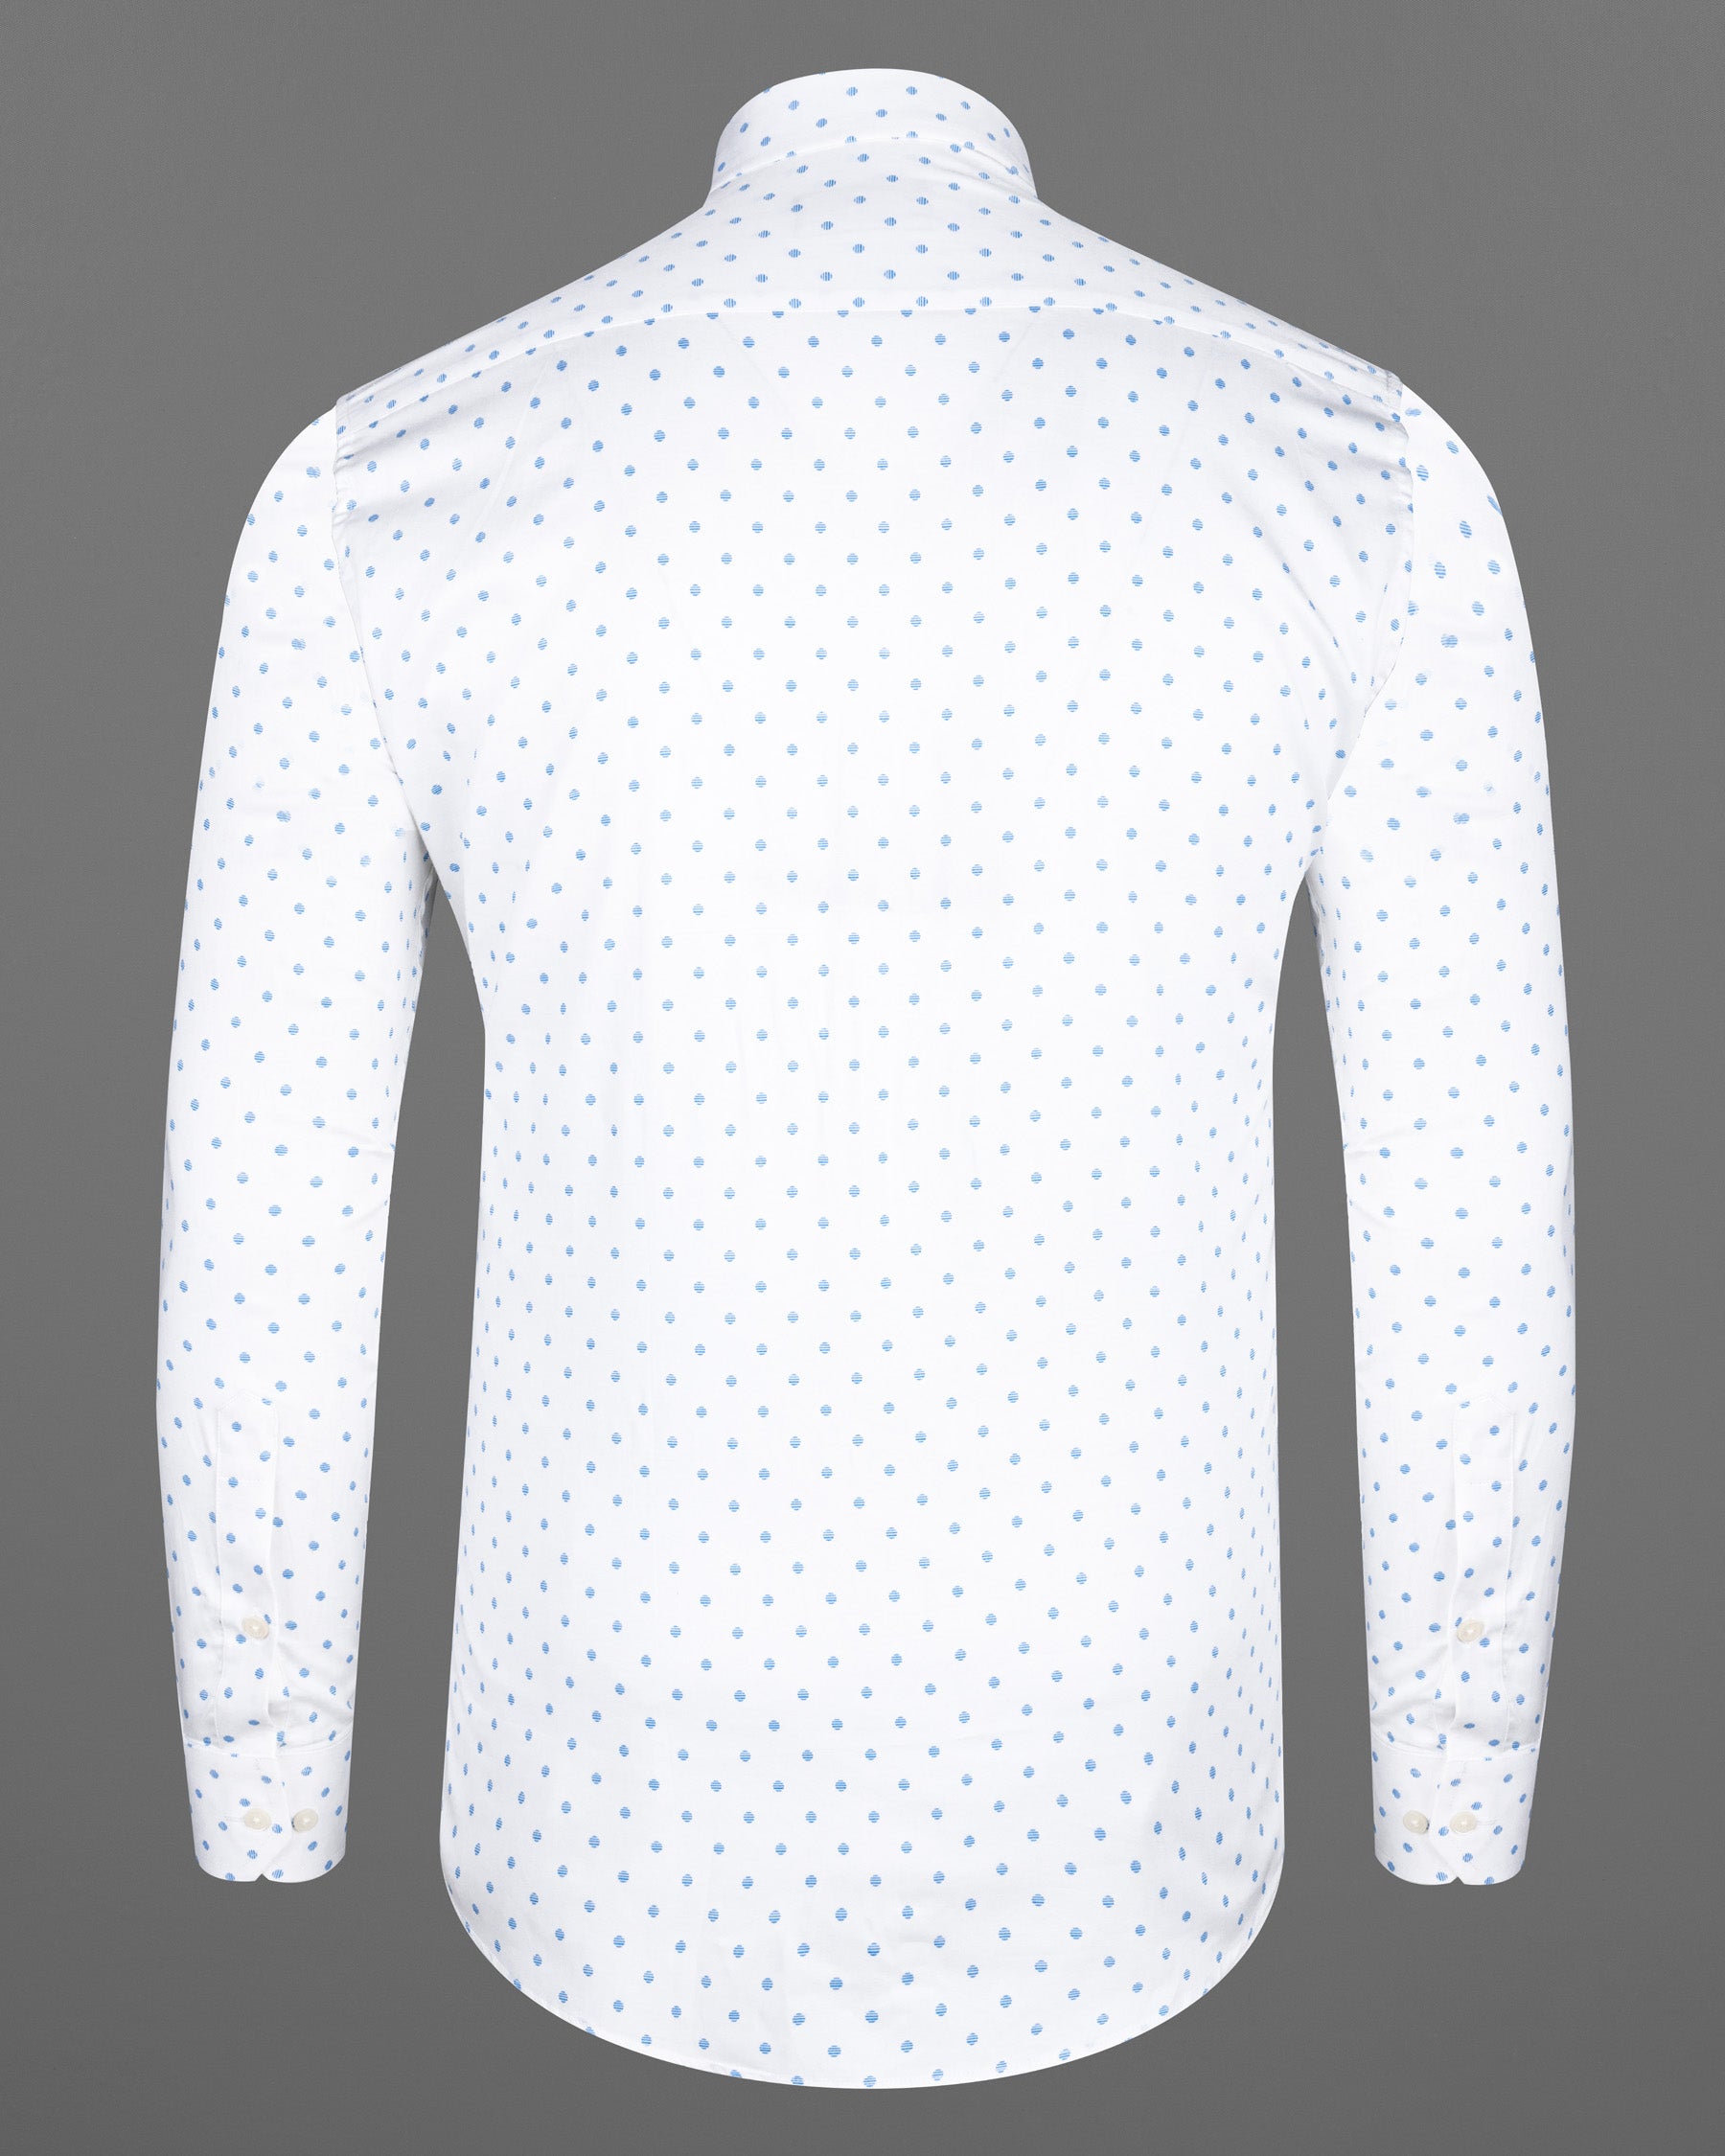 Bright White and Picton Blue Dotted Super Soft Premium Cotton Shirt 6978-38,6978-38,6978-39,6978-39,6978-40,6978-40,6978-42,6978-42,6978-44,6978-44,6978-46,6978-46,6978-48,6978-48,6978-50,6978-50,6978-52,6978-52Bright White and Picton Blue Dotted Super Soft Premium Cotton Shirt 6978-38,6978-38,6978-39,6978-39,6978-40,6978-40,6978-42,6978-42,6978-44,6978-44,6978-46,6978-46,6978-48,6978-48,6978-50,6978-50,6978-52,6978-52